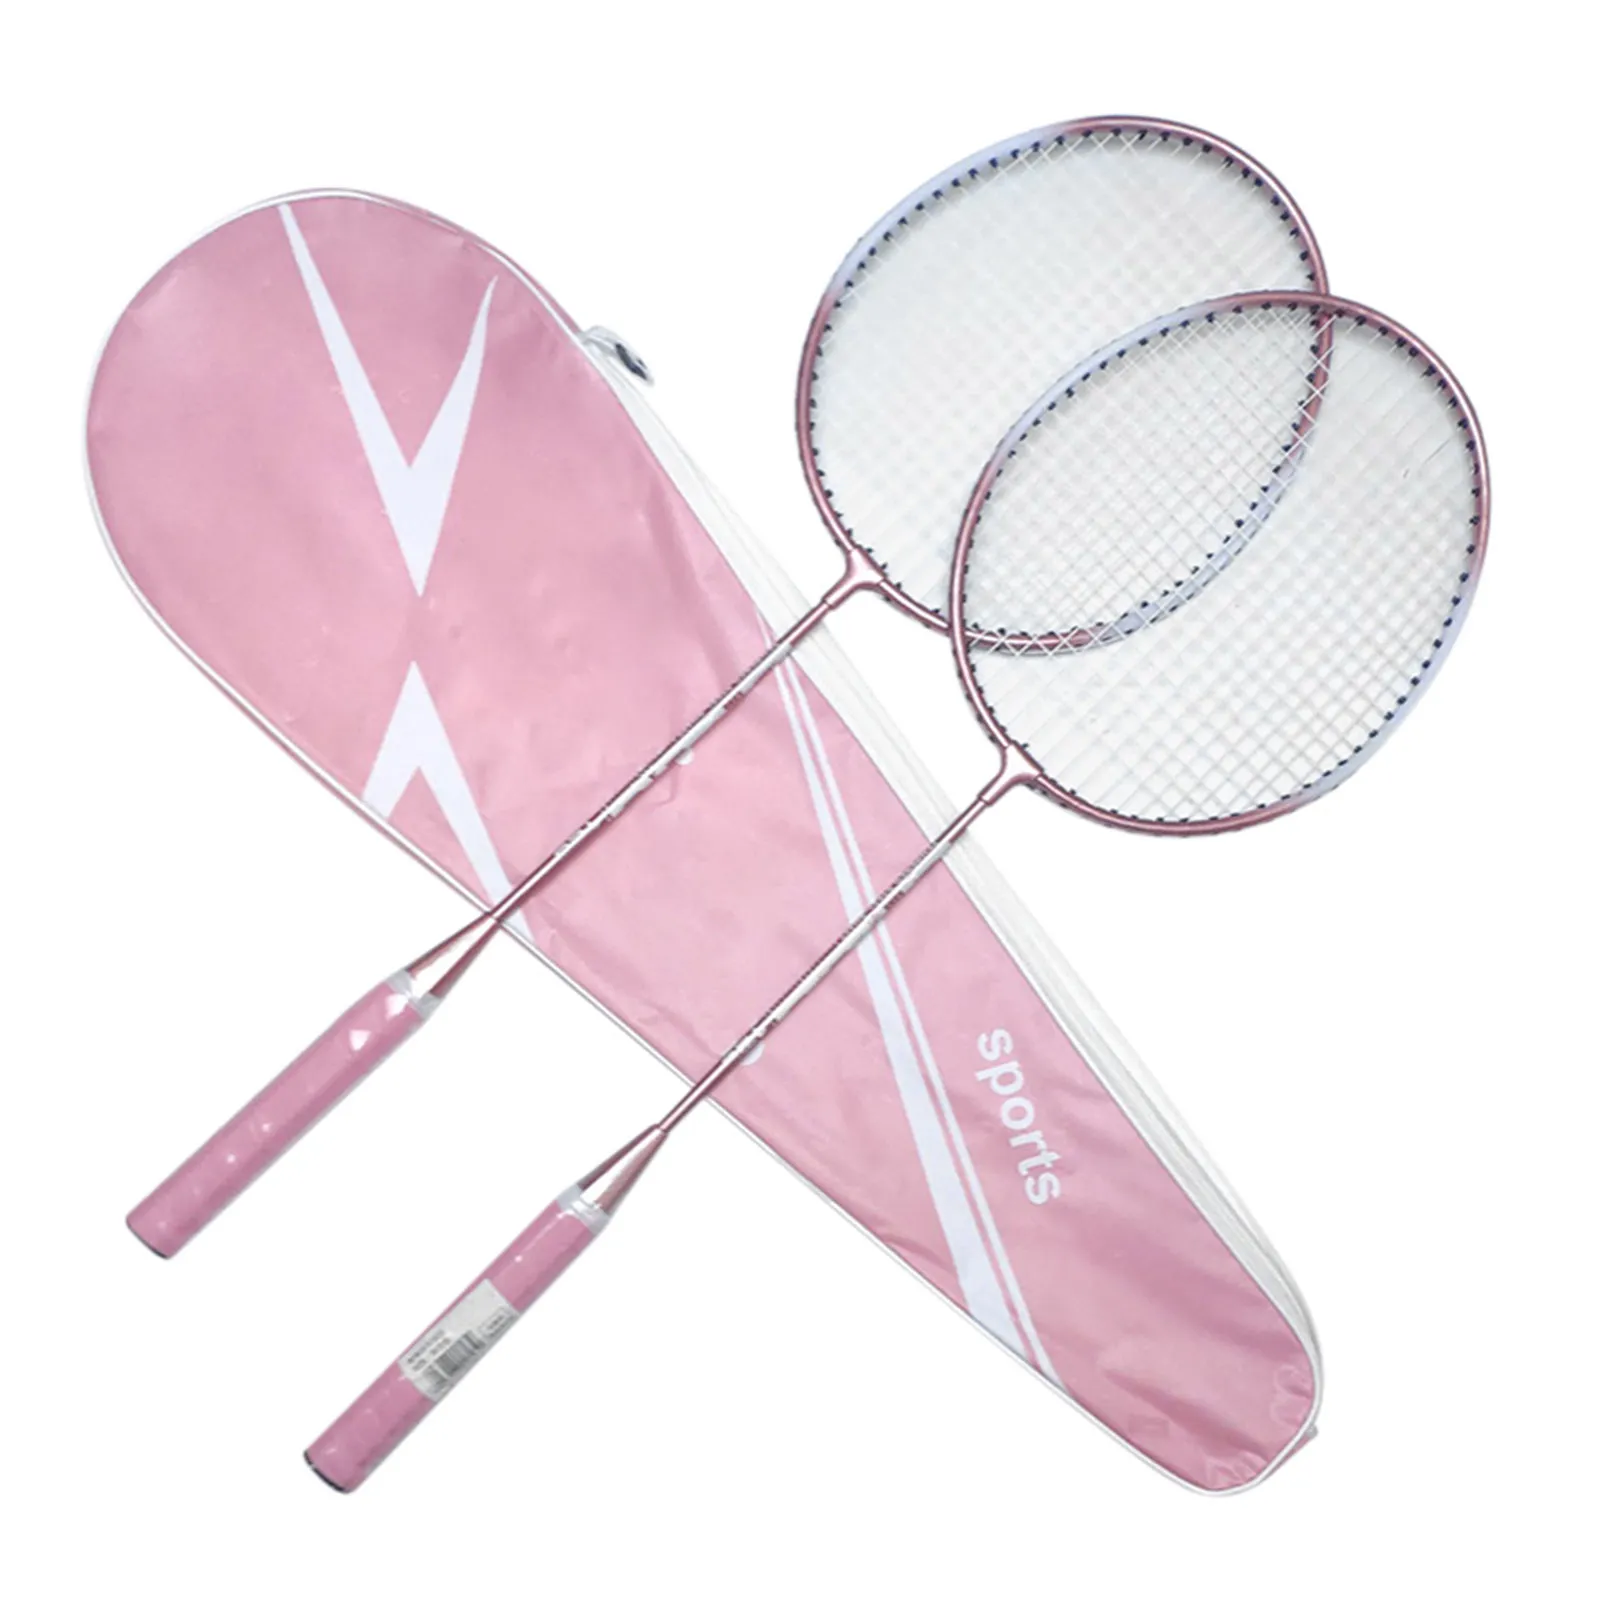 2pcs Badminton Rackets Professional with ...